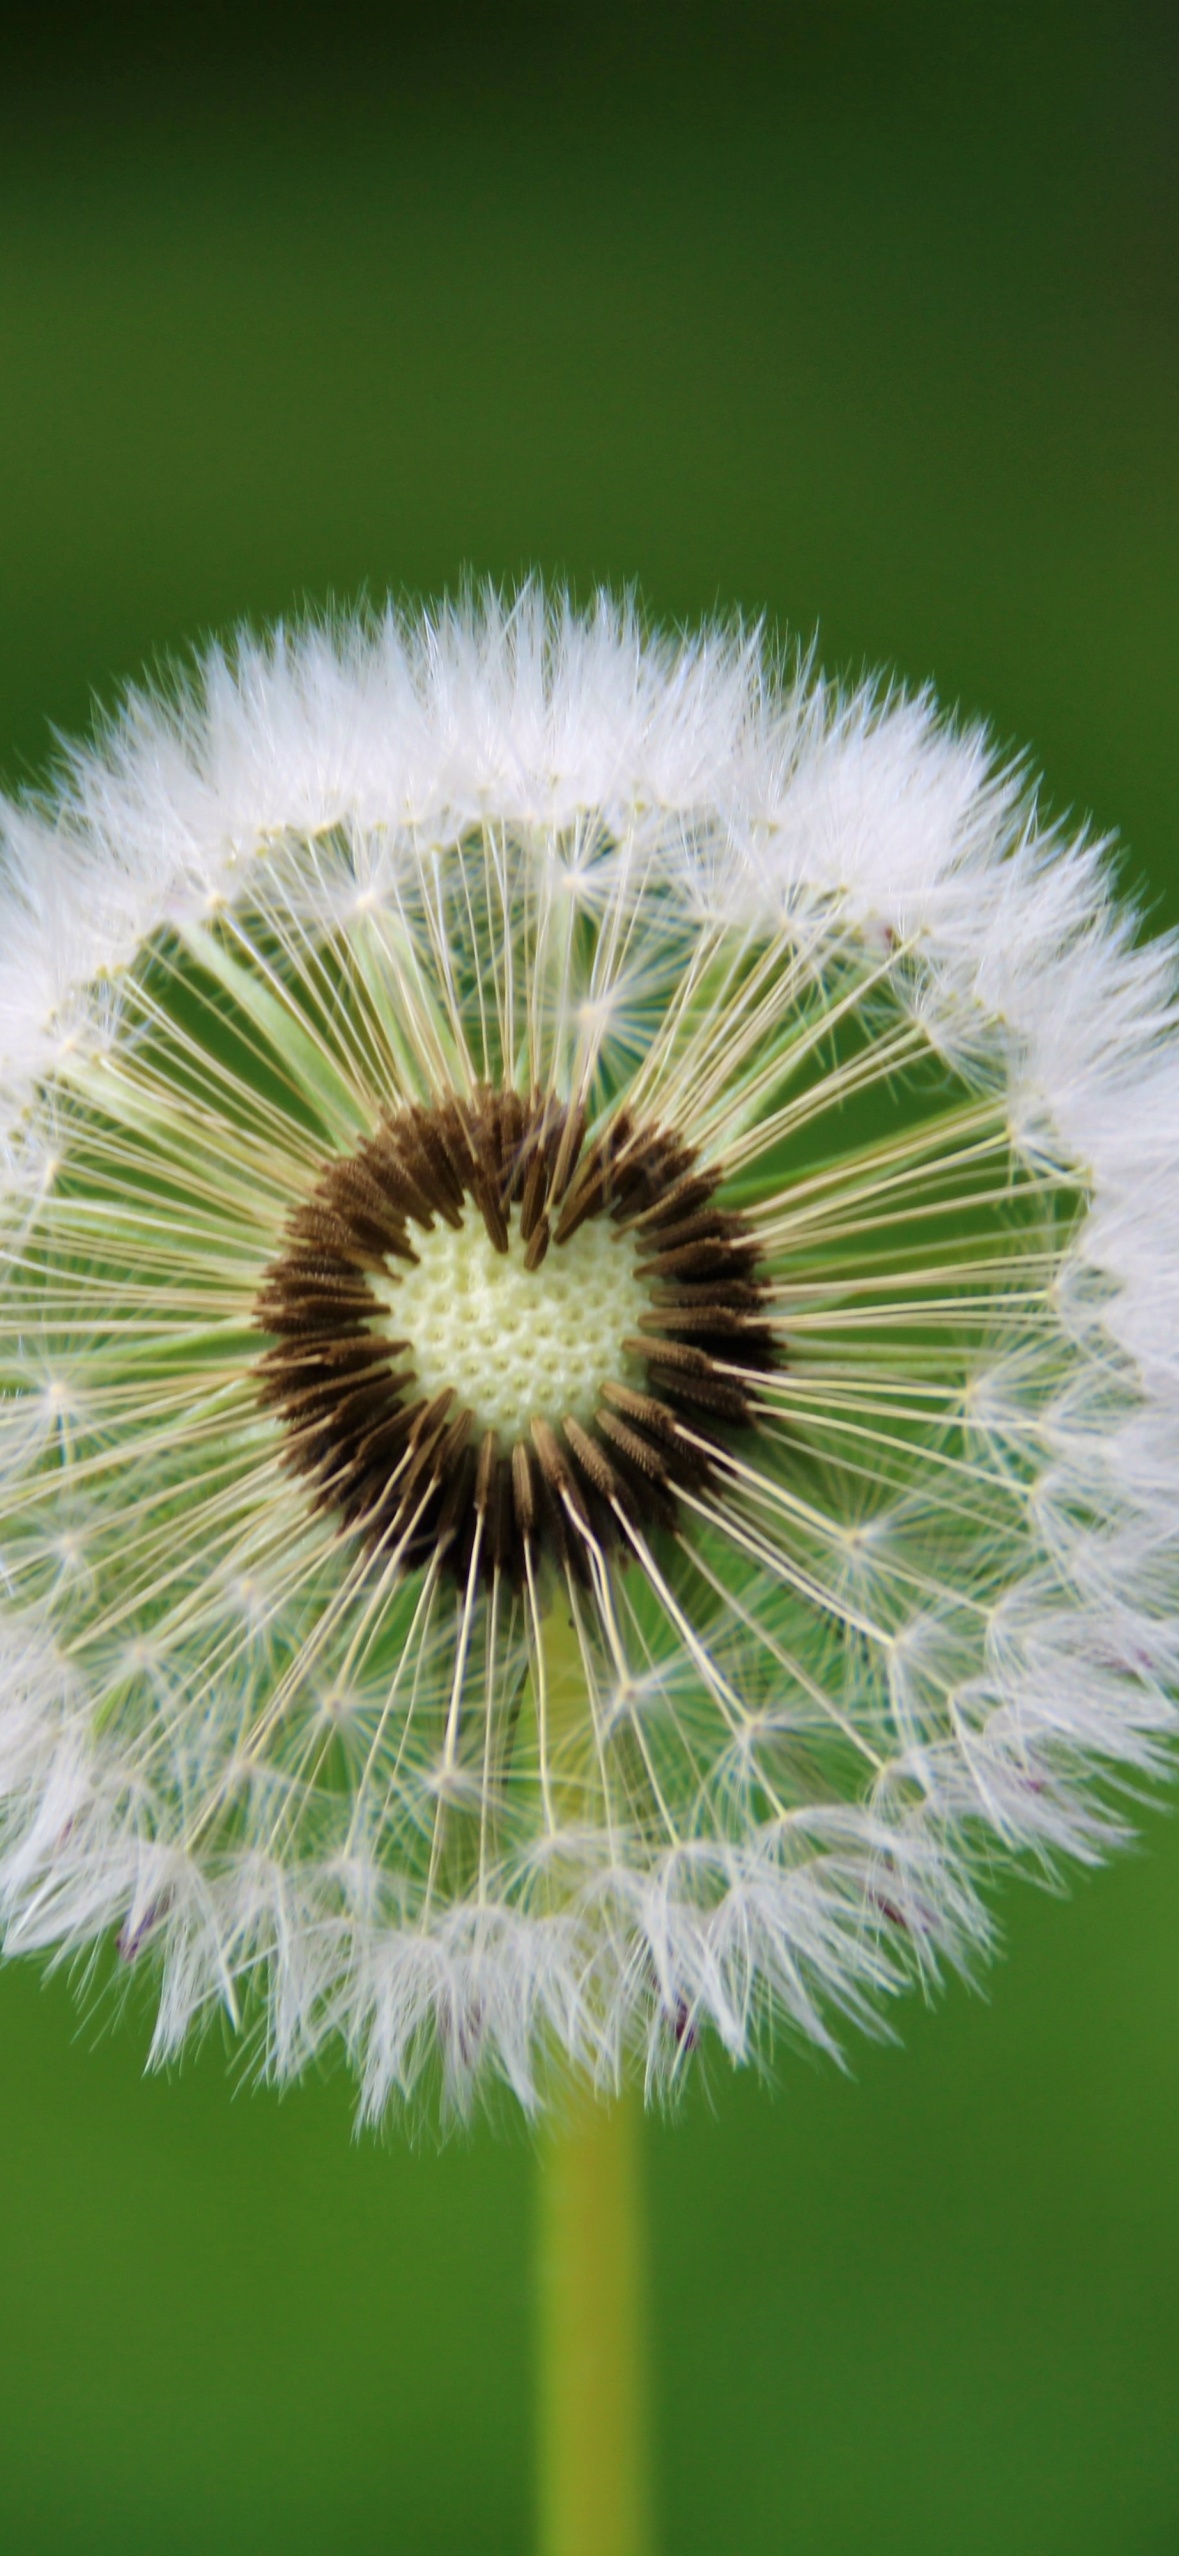 720x1280 Dandelion Plant Close Up Macro Moto G,X Xperia Z1,Z3  Compact,Galaxy S3,Note II,Nexus HD 4k Wallpapers, Images, Backgrounds,  Photos and Pictures